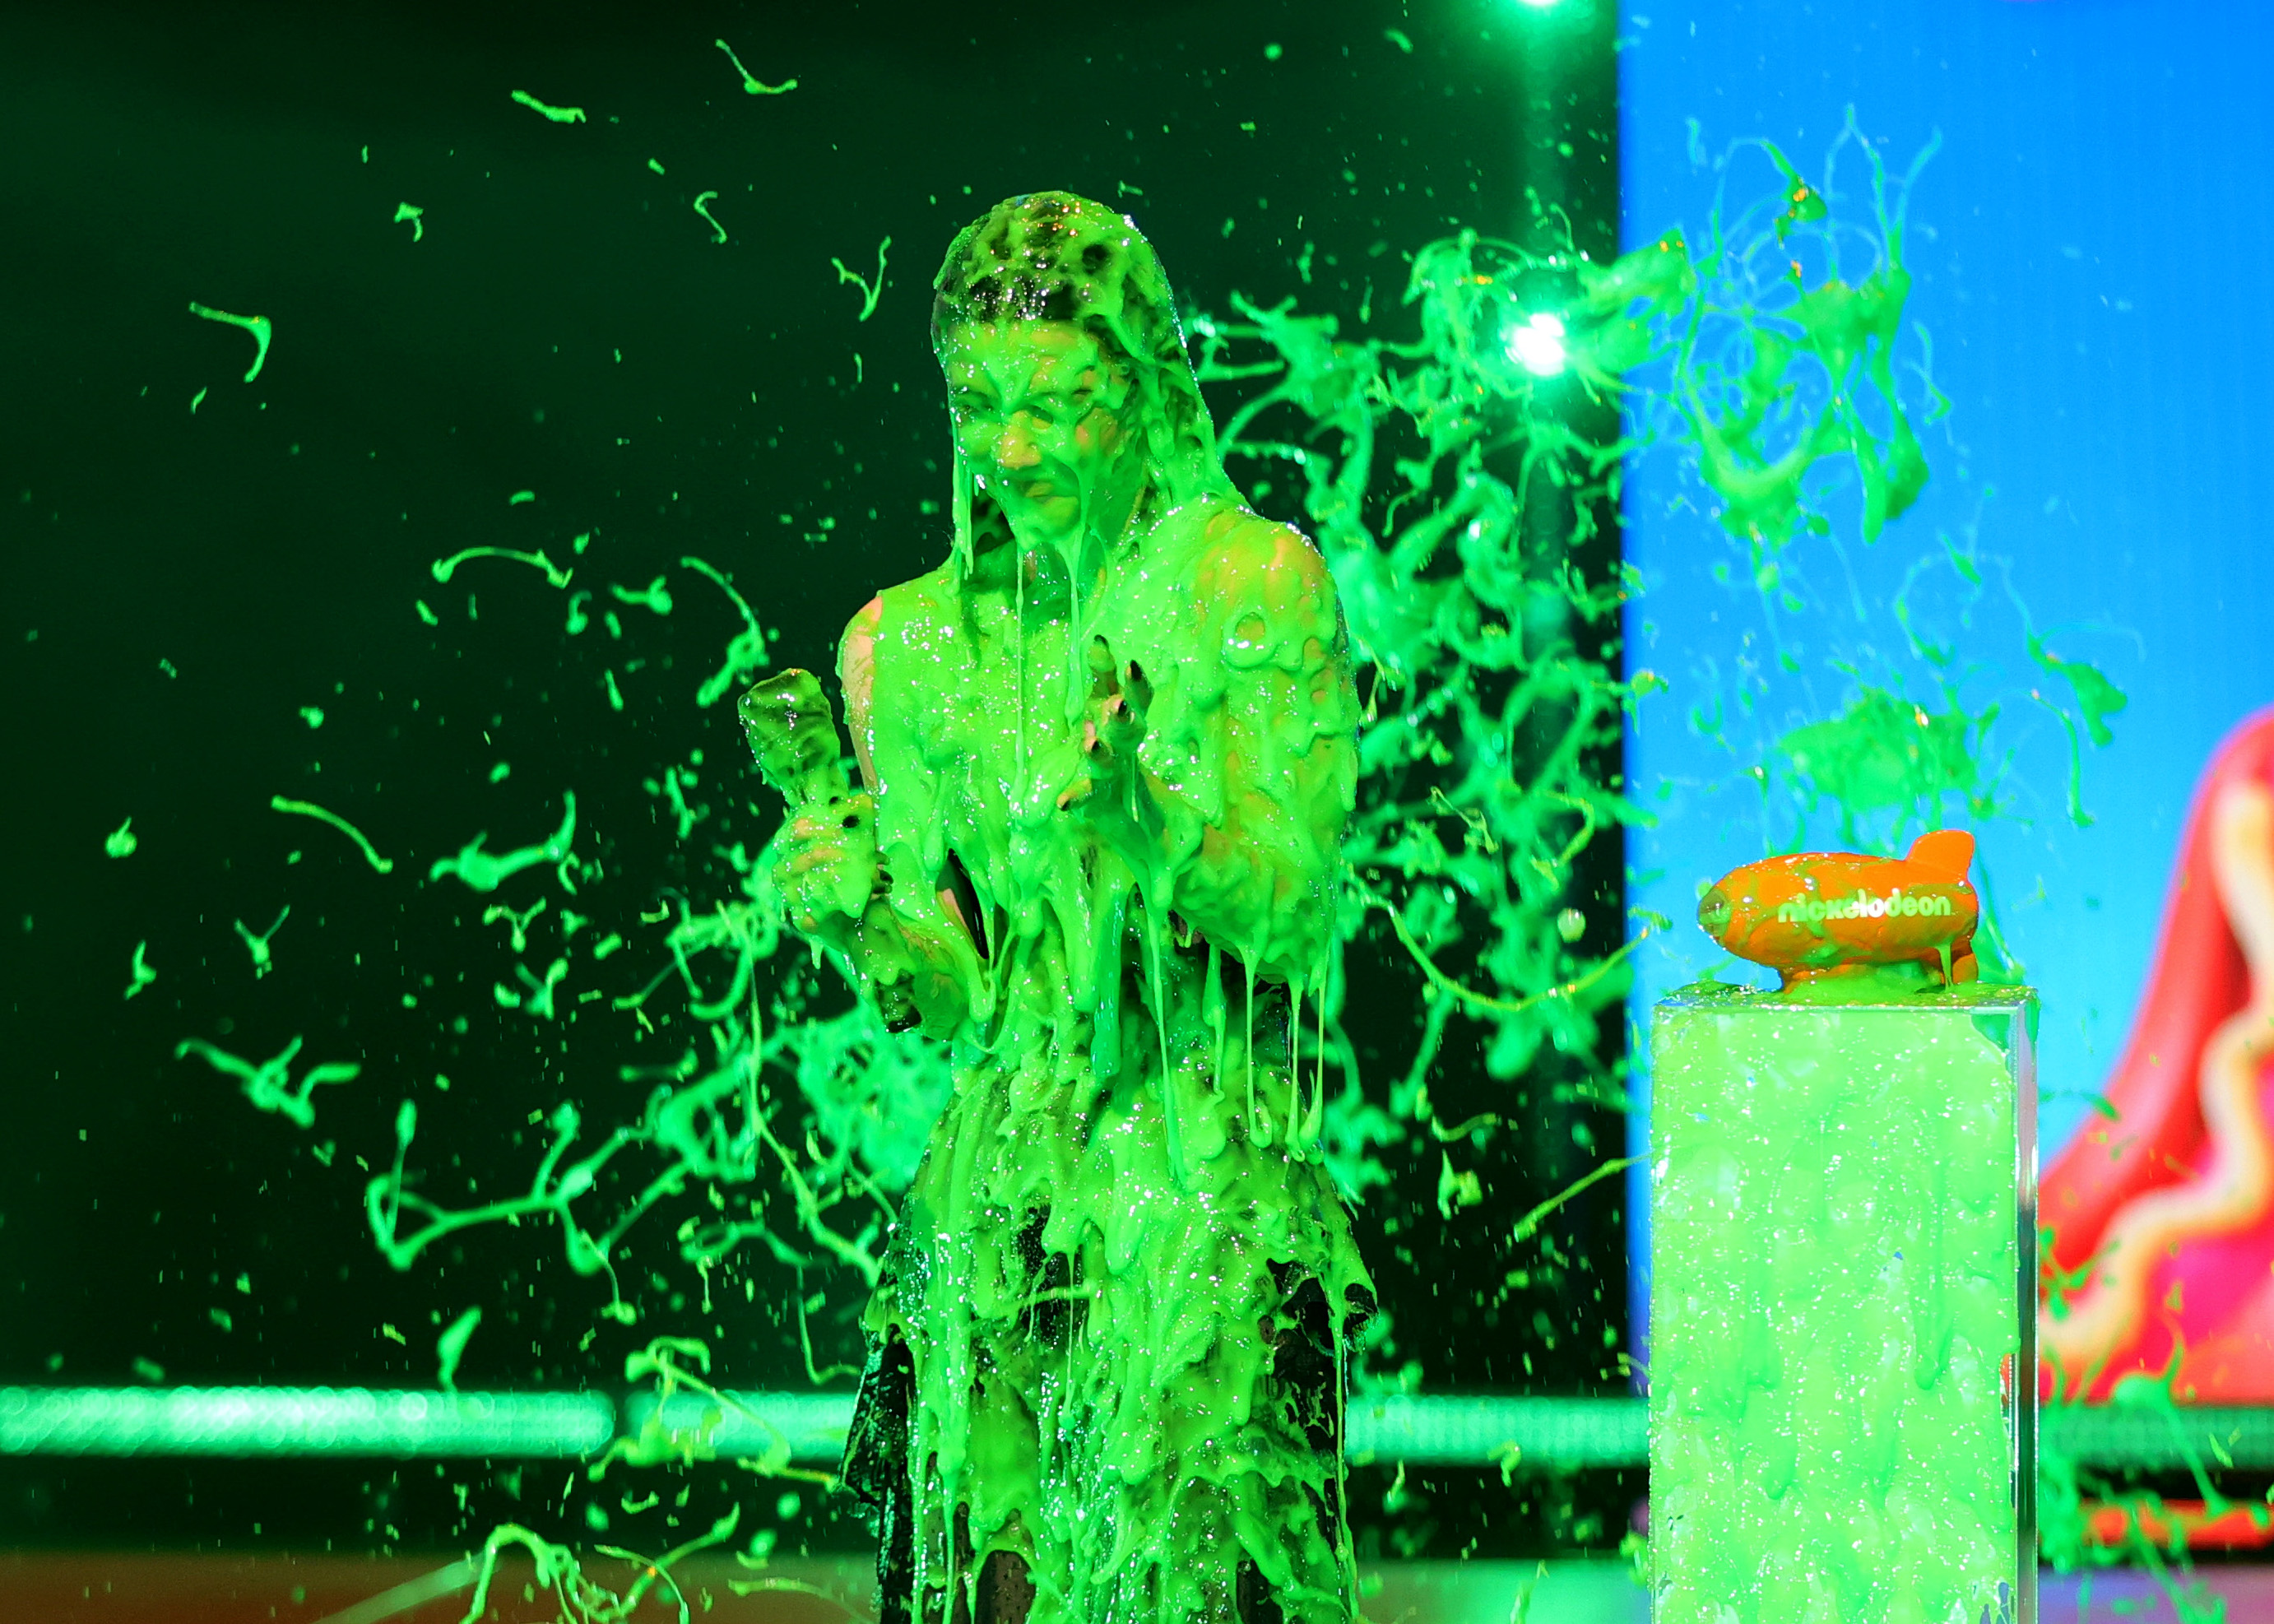 Dixie D'Amelio Gets SLIMED While Announcing the Kids' Choice Awards 2022  Hosts & Nominees! - Nickelodeon Kids' Choice Awards 2022 (Video Clip)